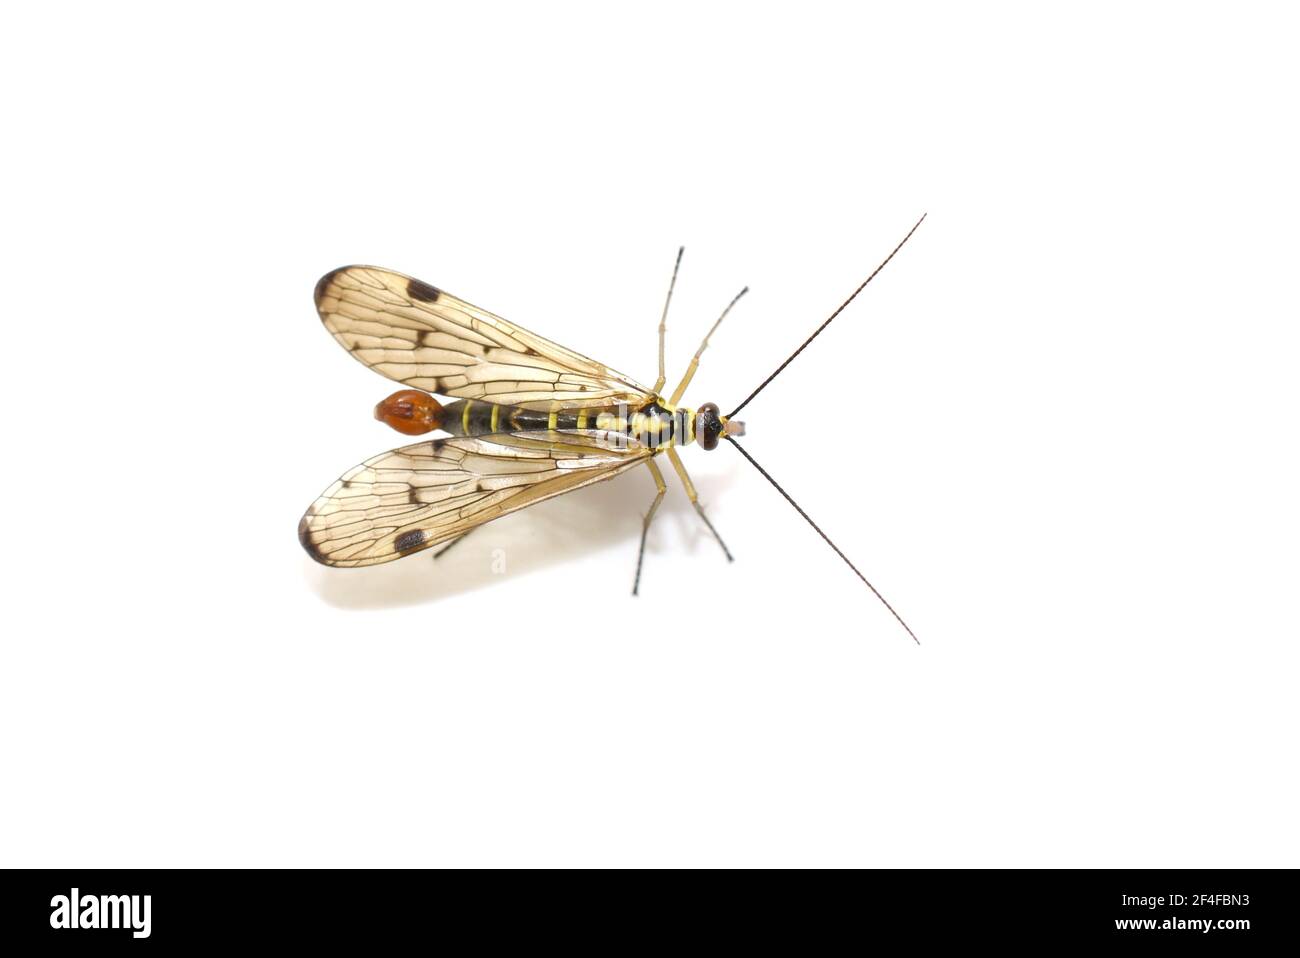 Common scorpion fly Panorpa communis on white background Stock Photo